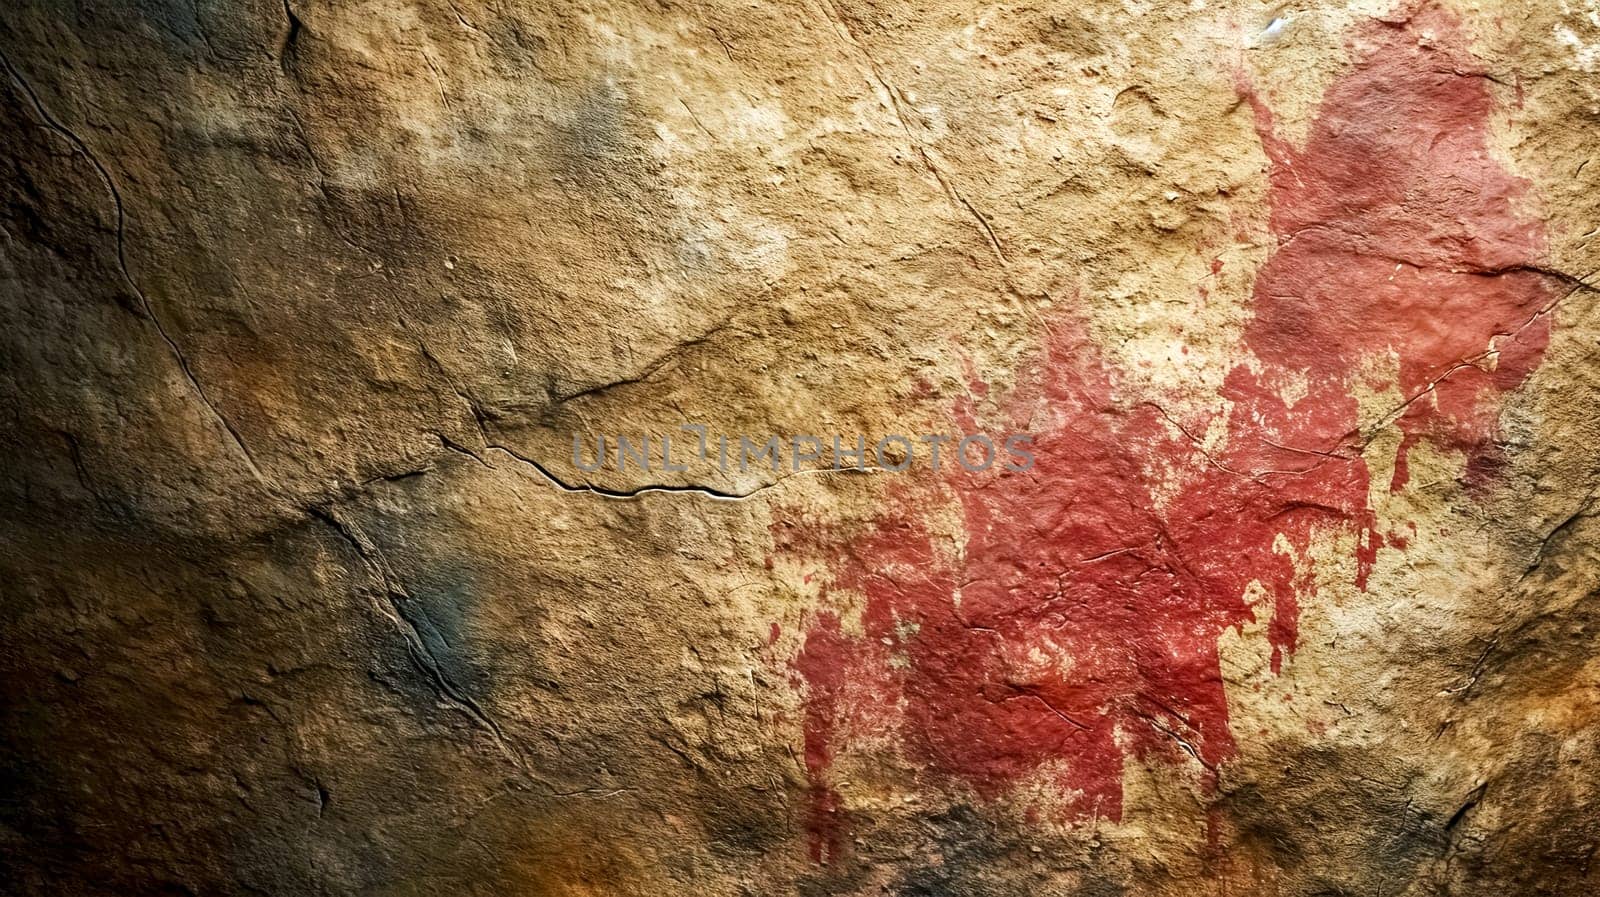 what appears to be an ancient cave painting, featuring a red ochre handprint on a natural stone surface, suggesting a human presence and activity from a bygone era. copy space